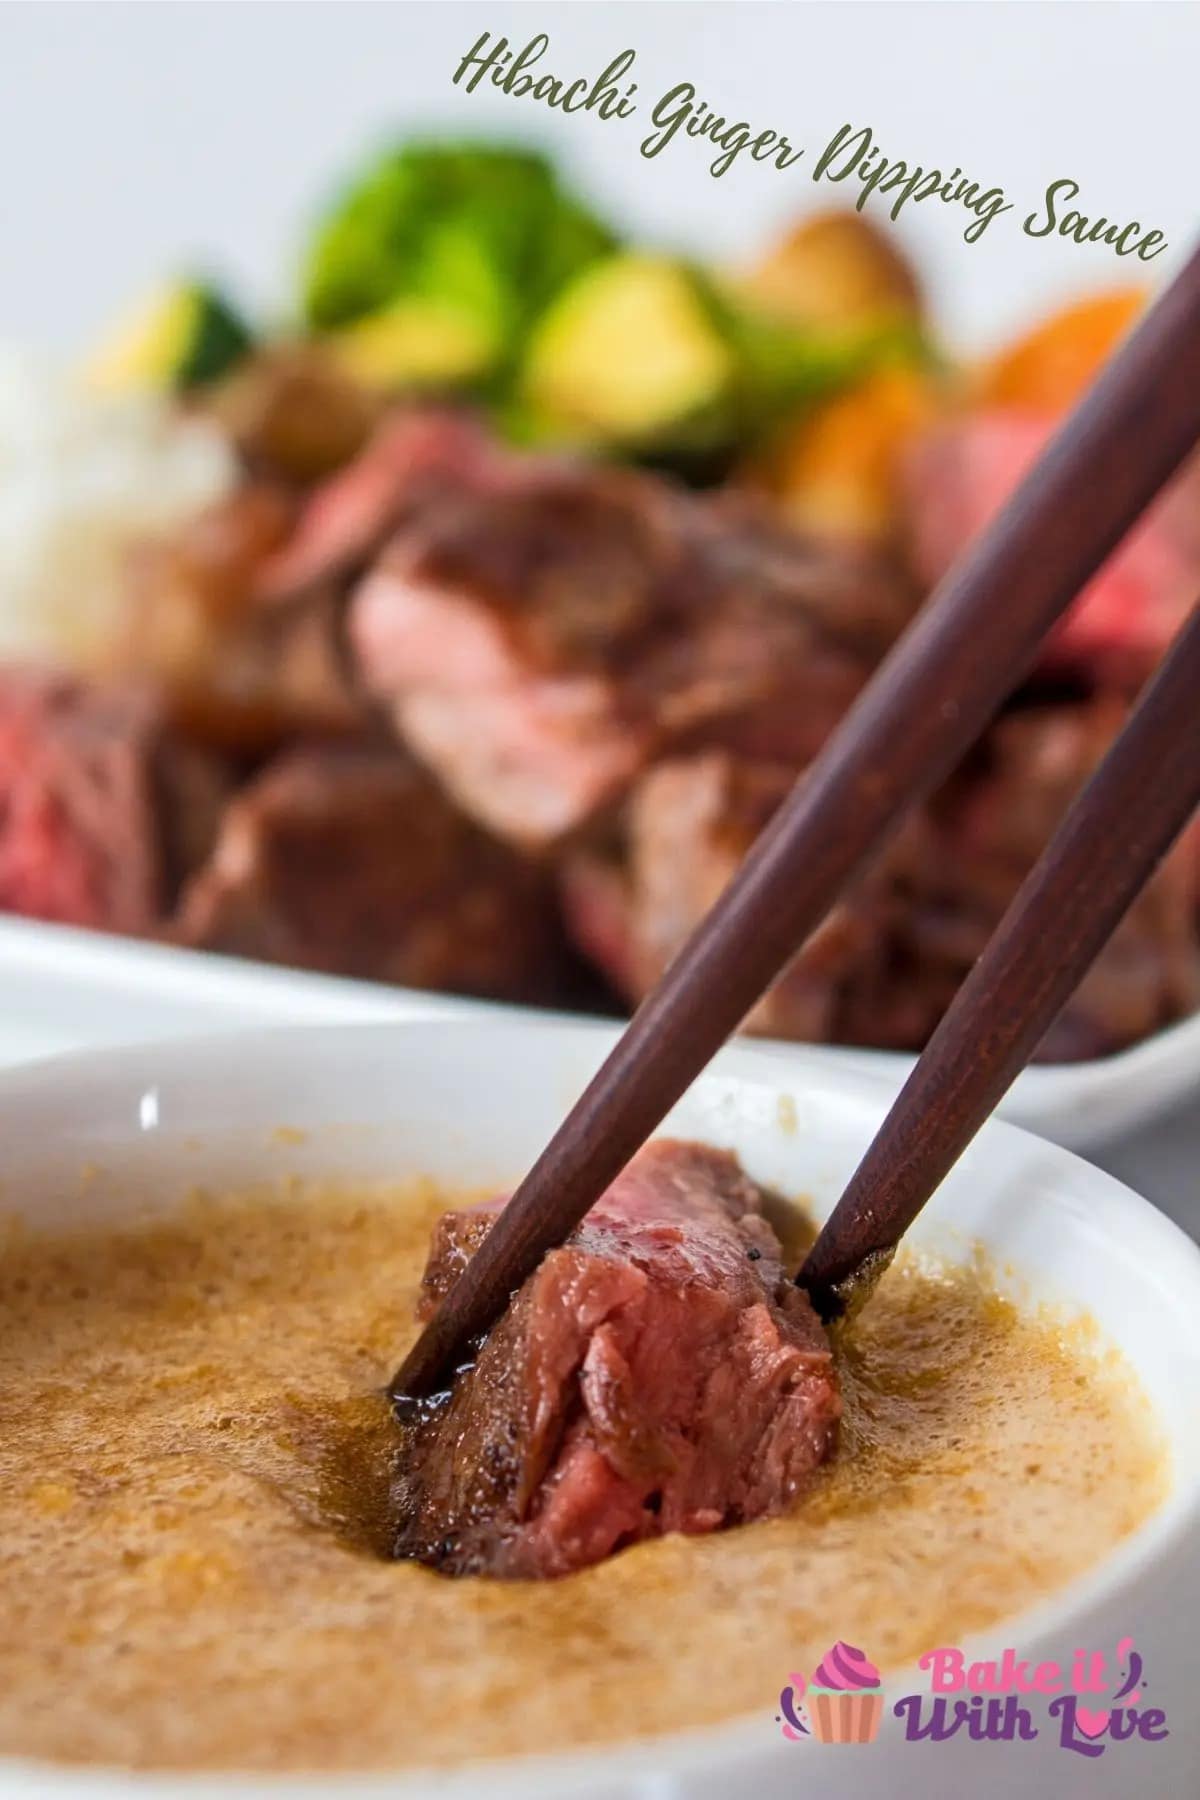 A person dipping a steak into a bowl of hibachi ginger sauce